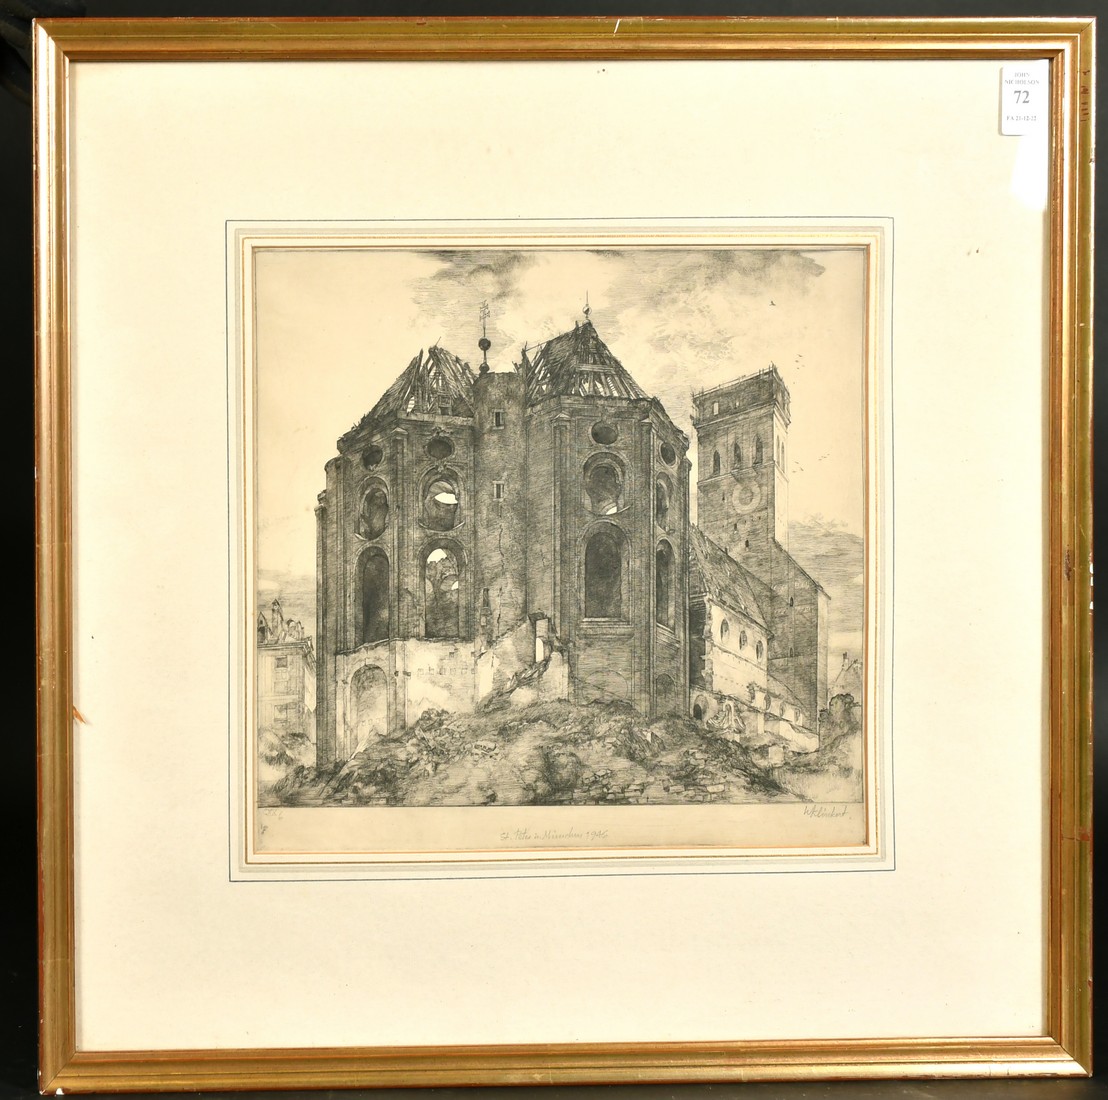 Walter Klinkert, 'St Peter in Munchen, 1946', signed, inscribed, and numbered in pencil, plate - Image 2 of 4